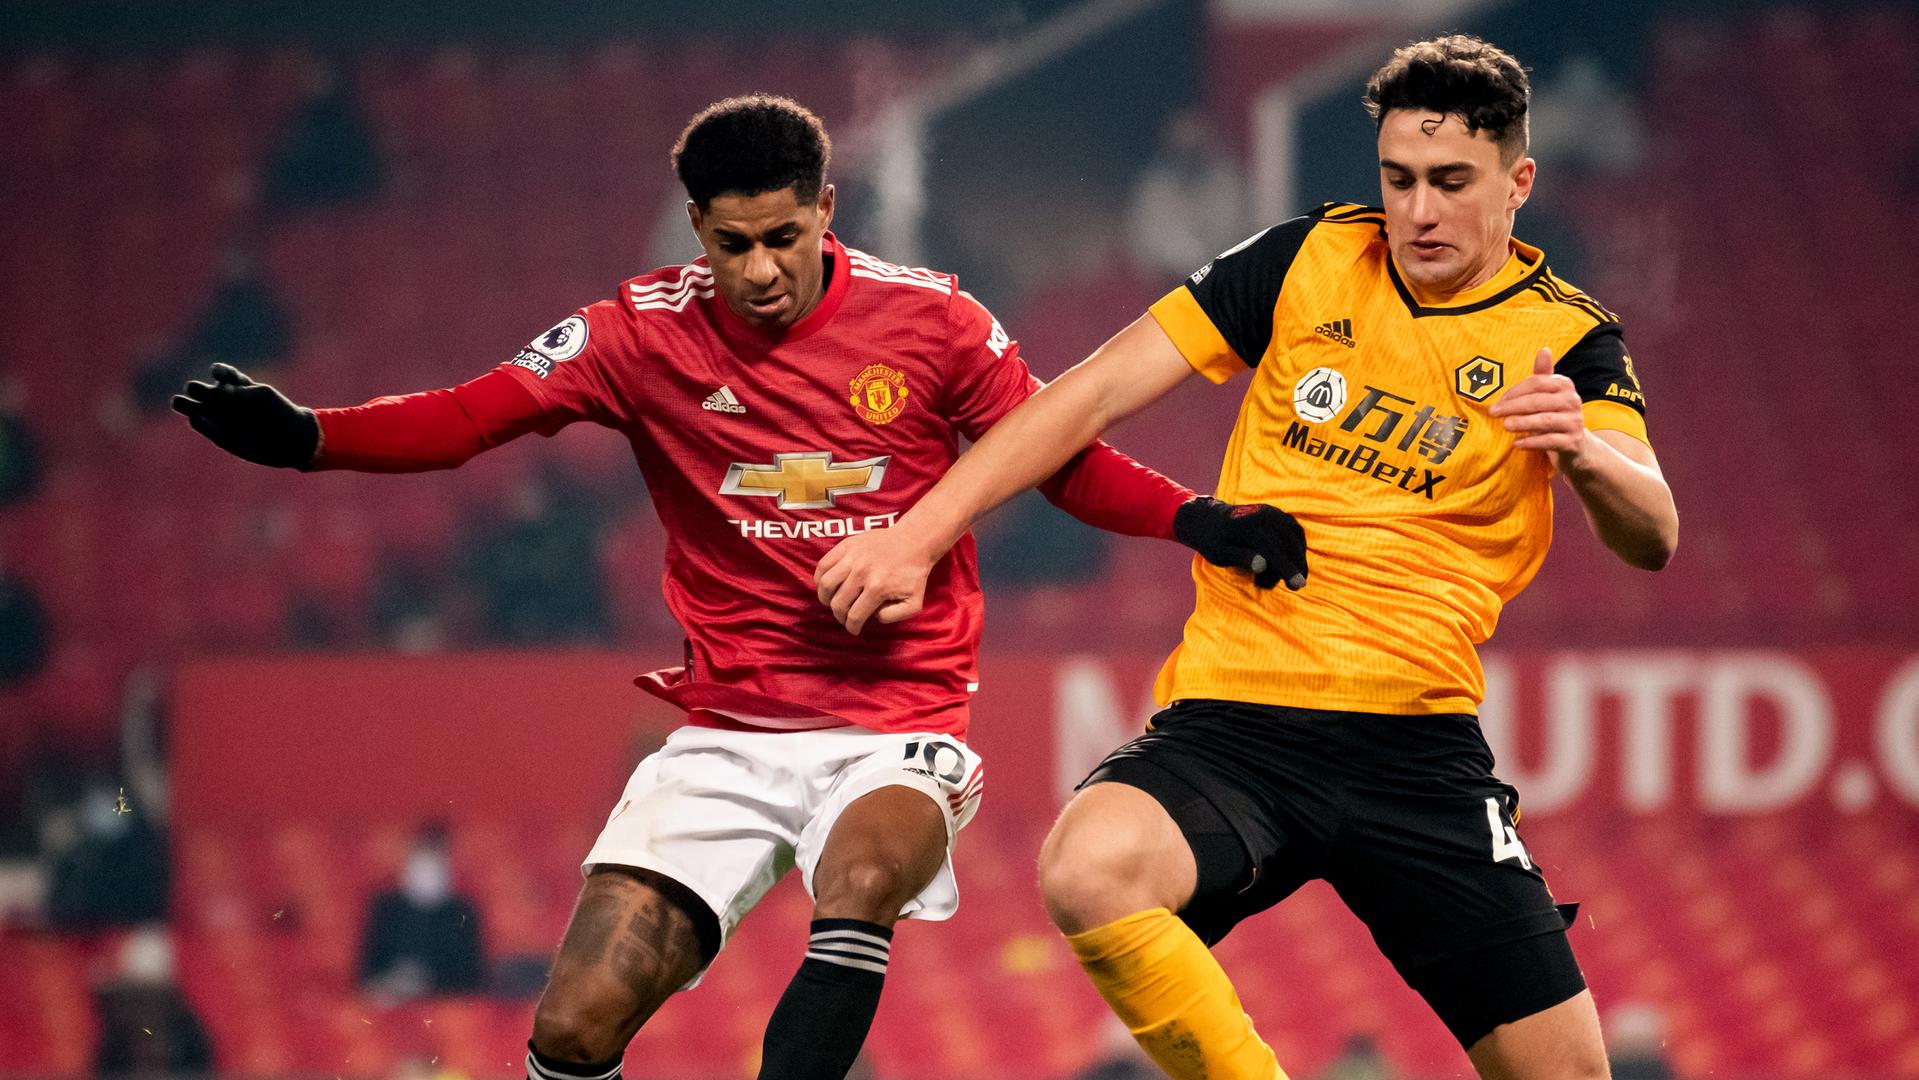 Match preview and how to watch Wolves v Man Utd 23 May Manchester United